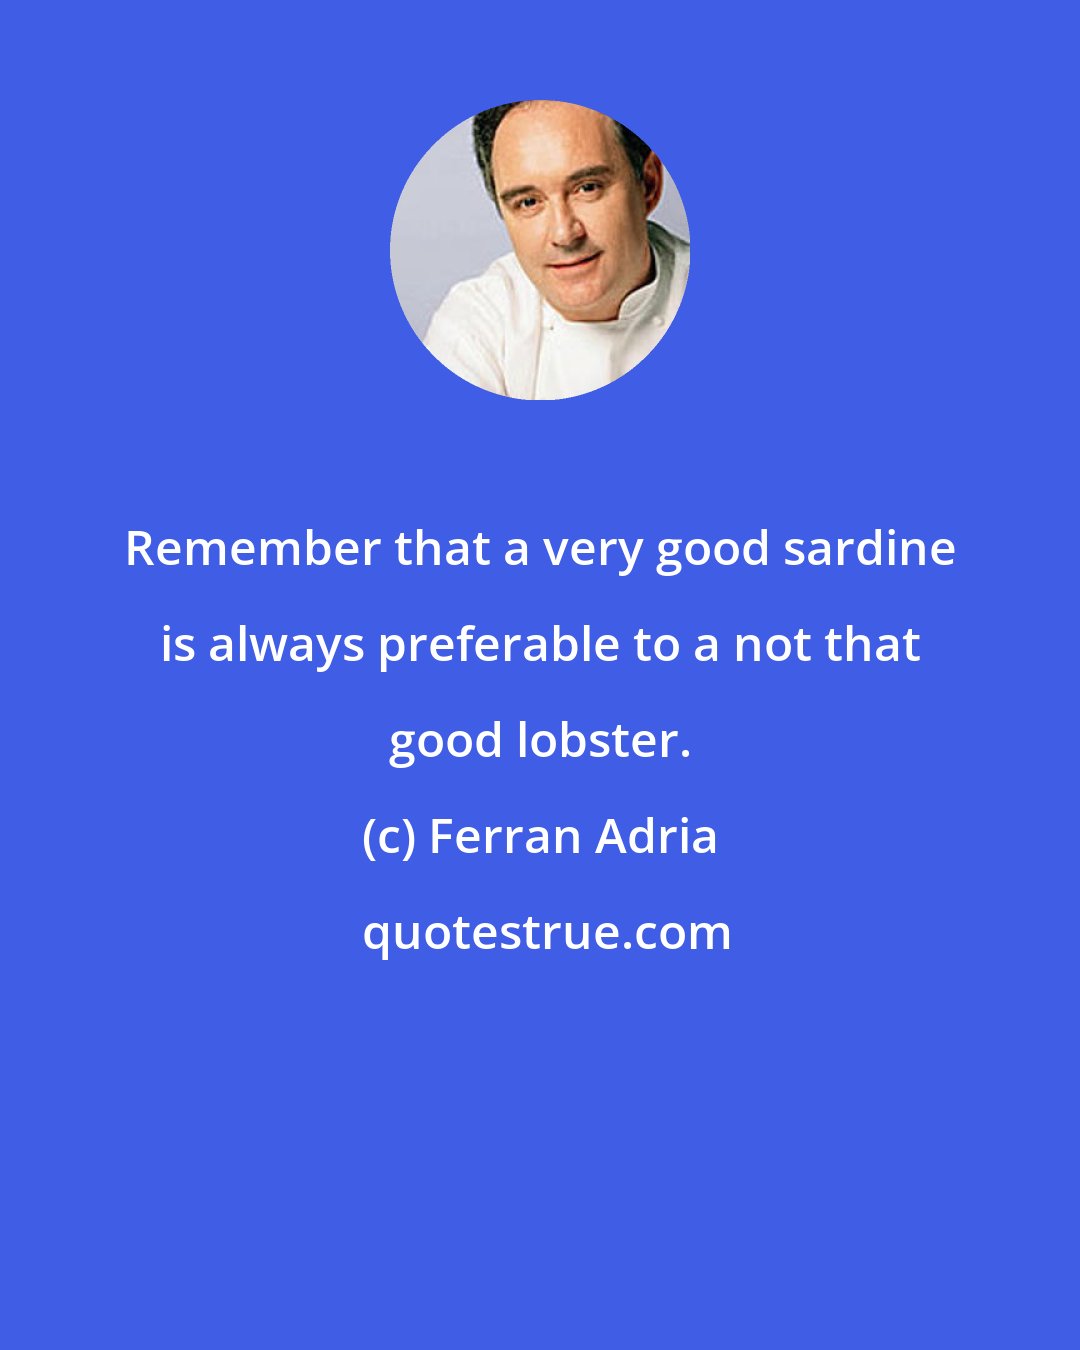 Ferran Adria: Remember that a very good sardine is always preferable to a not that good lobster.